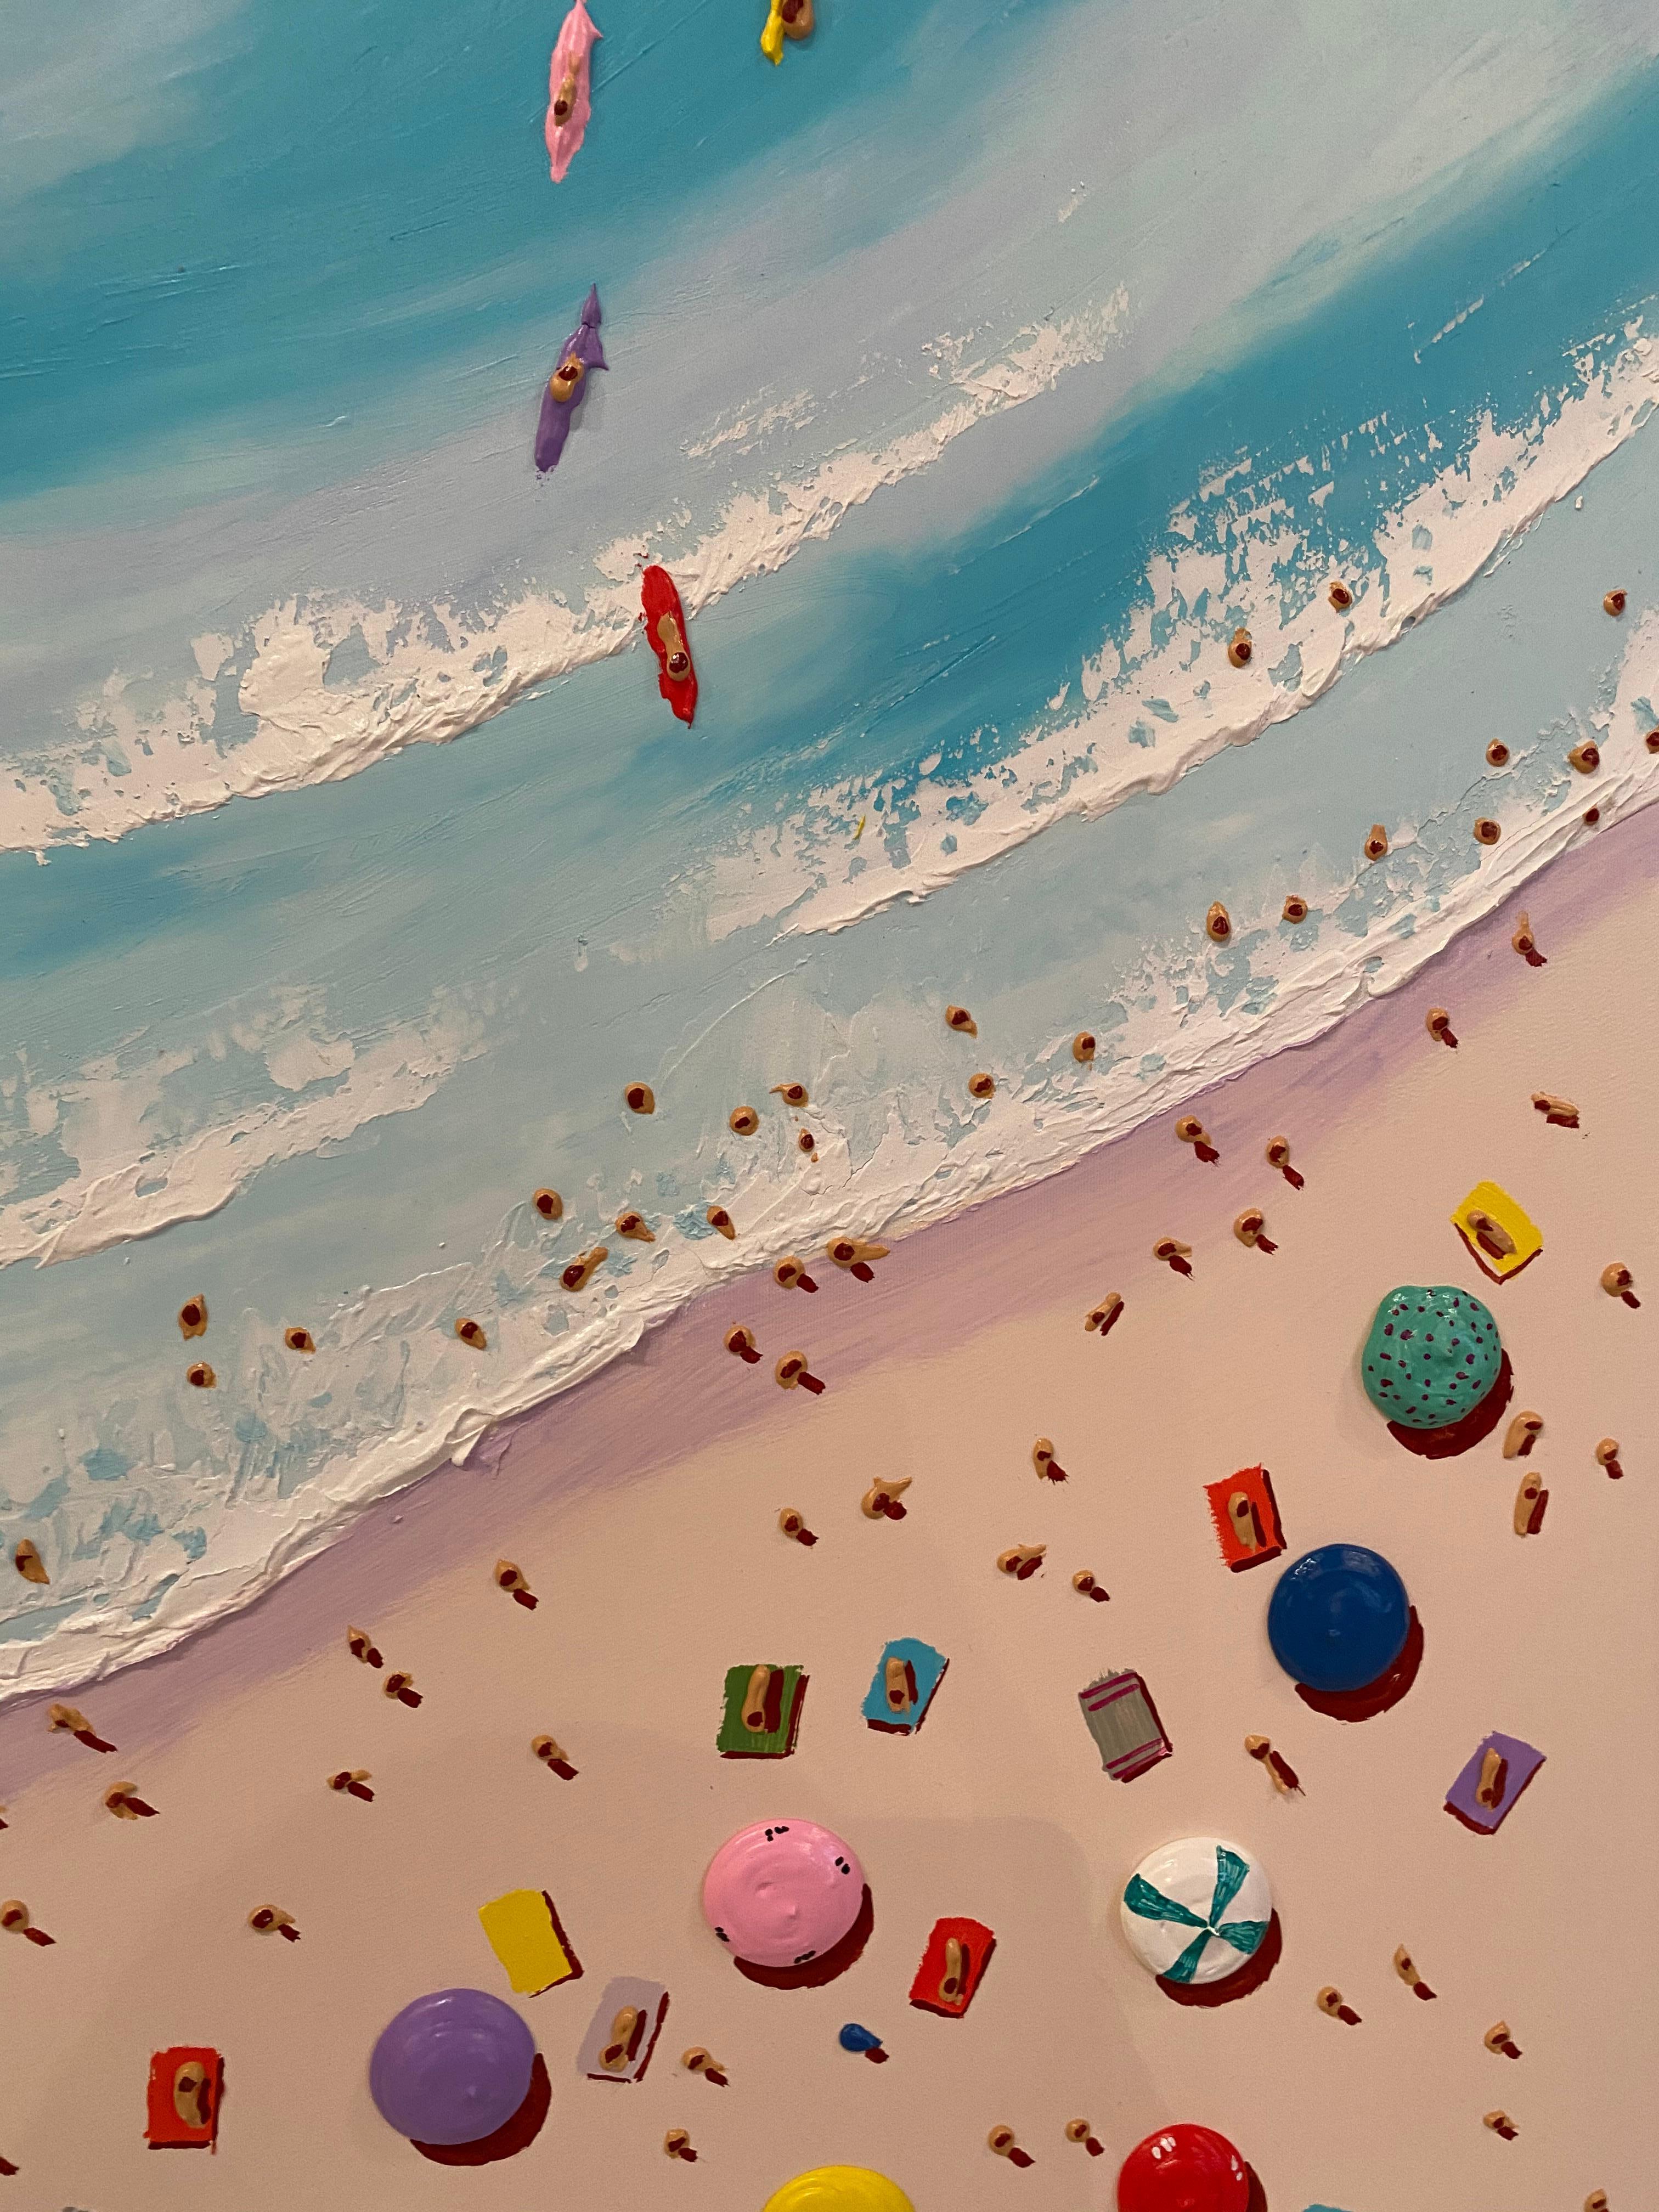 'Fun in the Sun' is a fun and vibrant piece that just pops off the wall. It is extraordinarily unconventional and sure to inspire conversation. 'Fun in the Sun' is part of a series of works indulging in the joy of a day at the beach. 

Max Todd uses